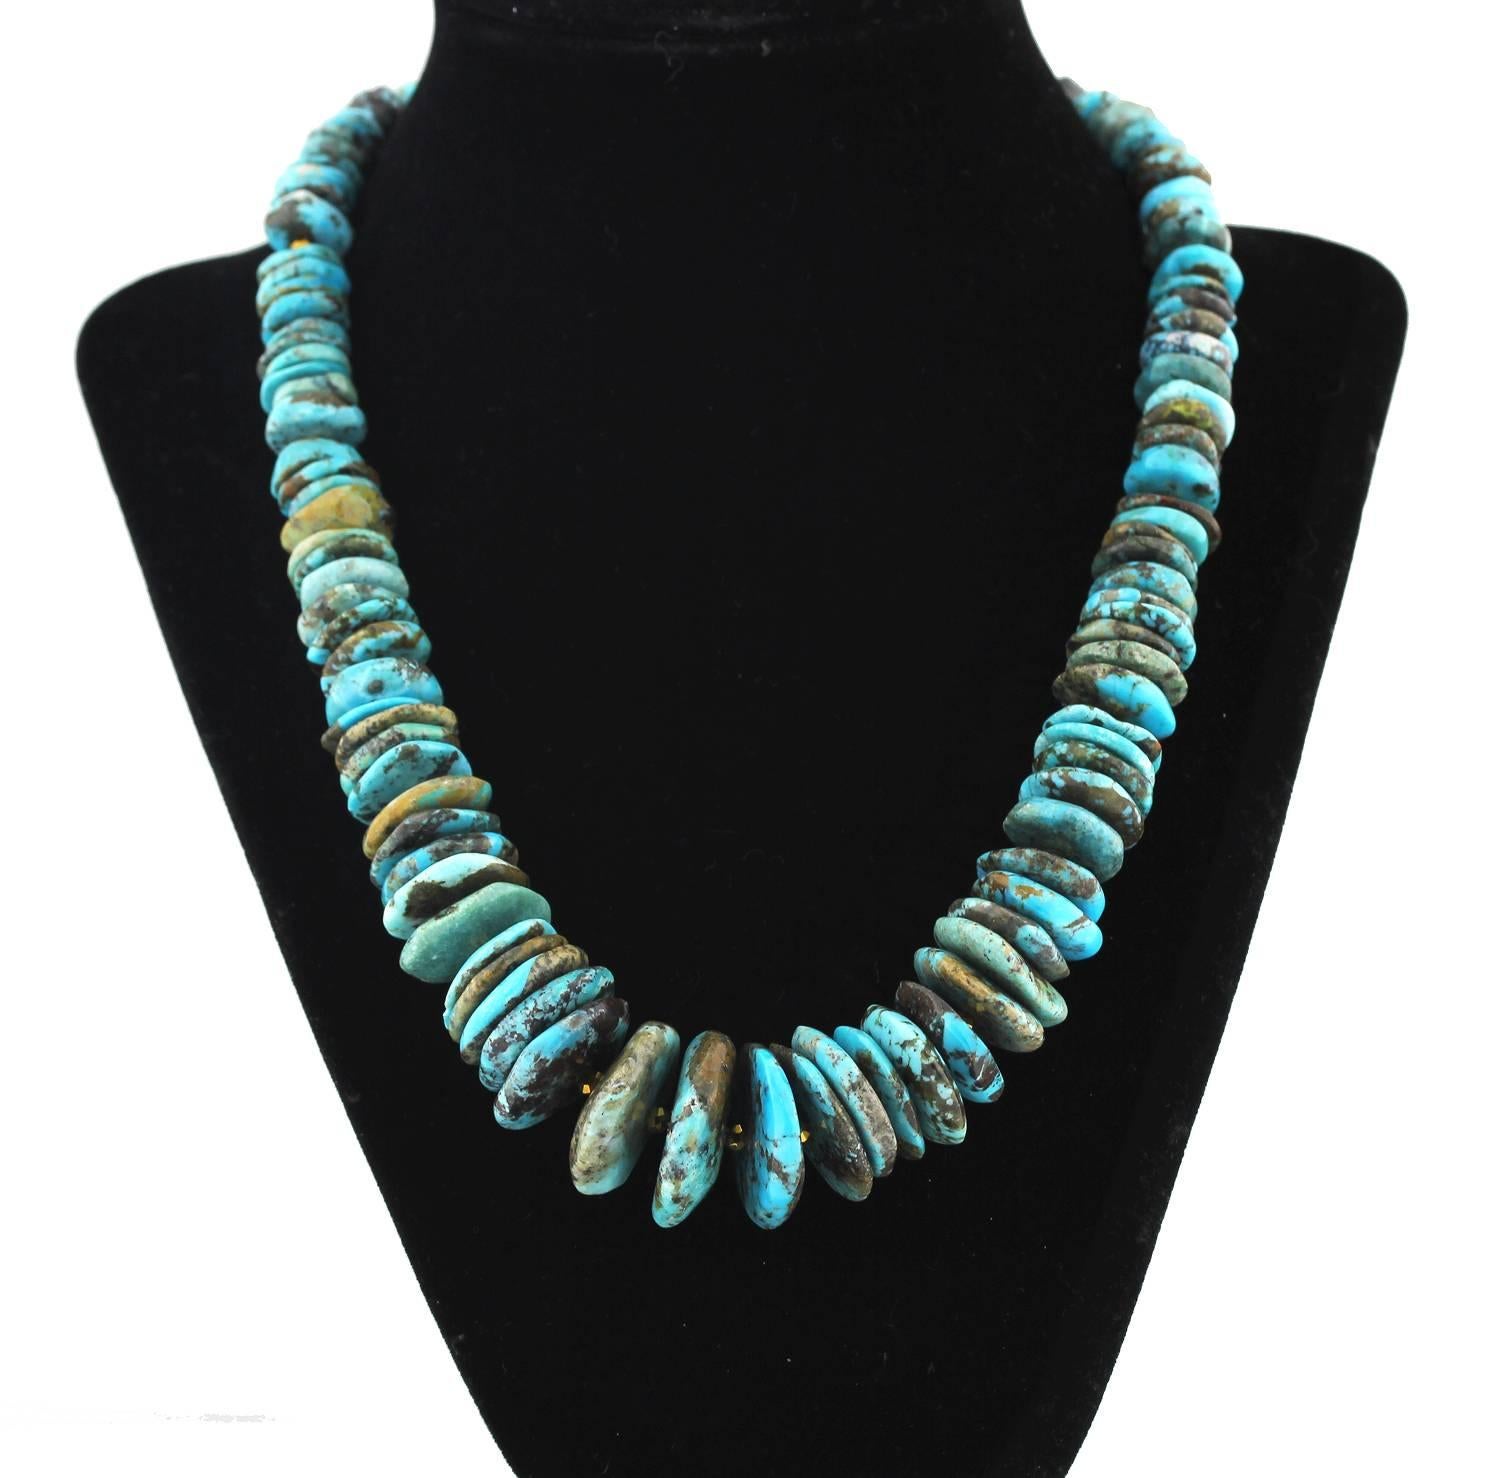 Graduated  unique chunky rondel slices of natural multi-color Turquoise with occasional interspersed gold tone accents make up this handmade necklace.
Size:  11 mm up to 25 mm
Length:  19.5 inches
Clasp:  gold tone